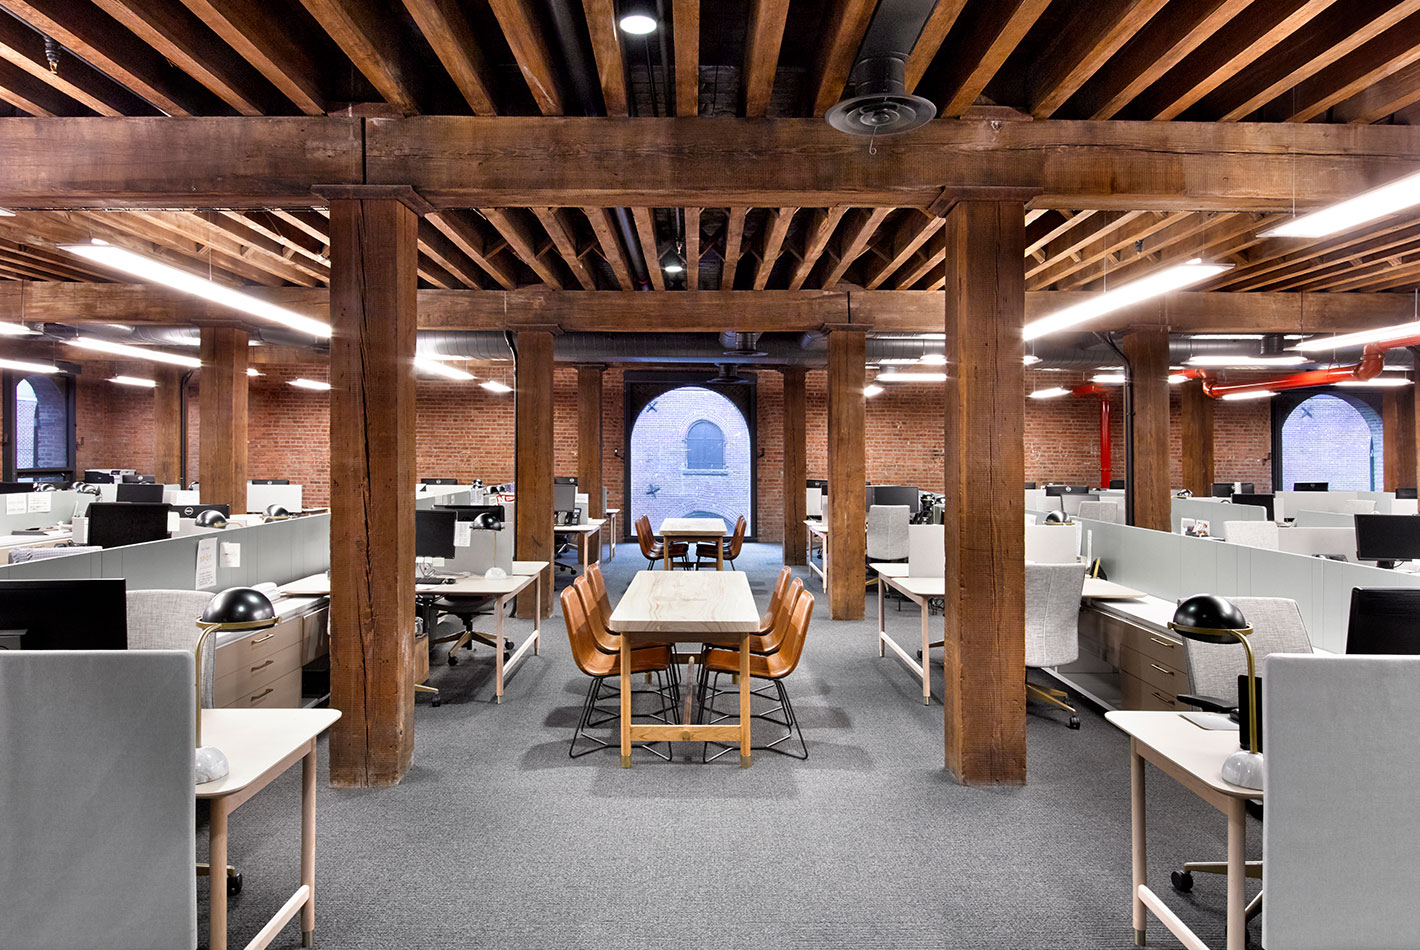 Original 19th century wood columns and ceiling beams contrast with light office furniture in the offices at West Elm Headquarters. An arched window is at the back of the space.